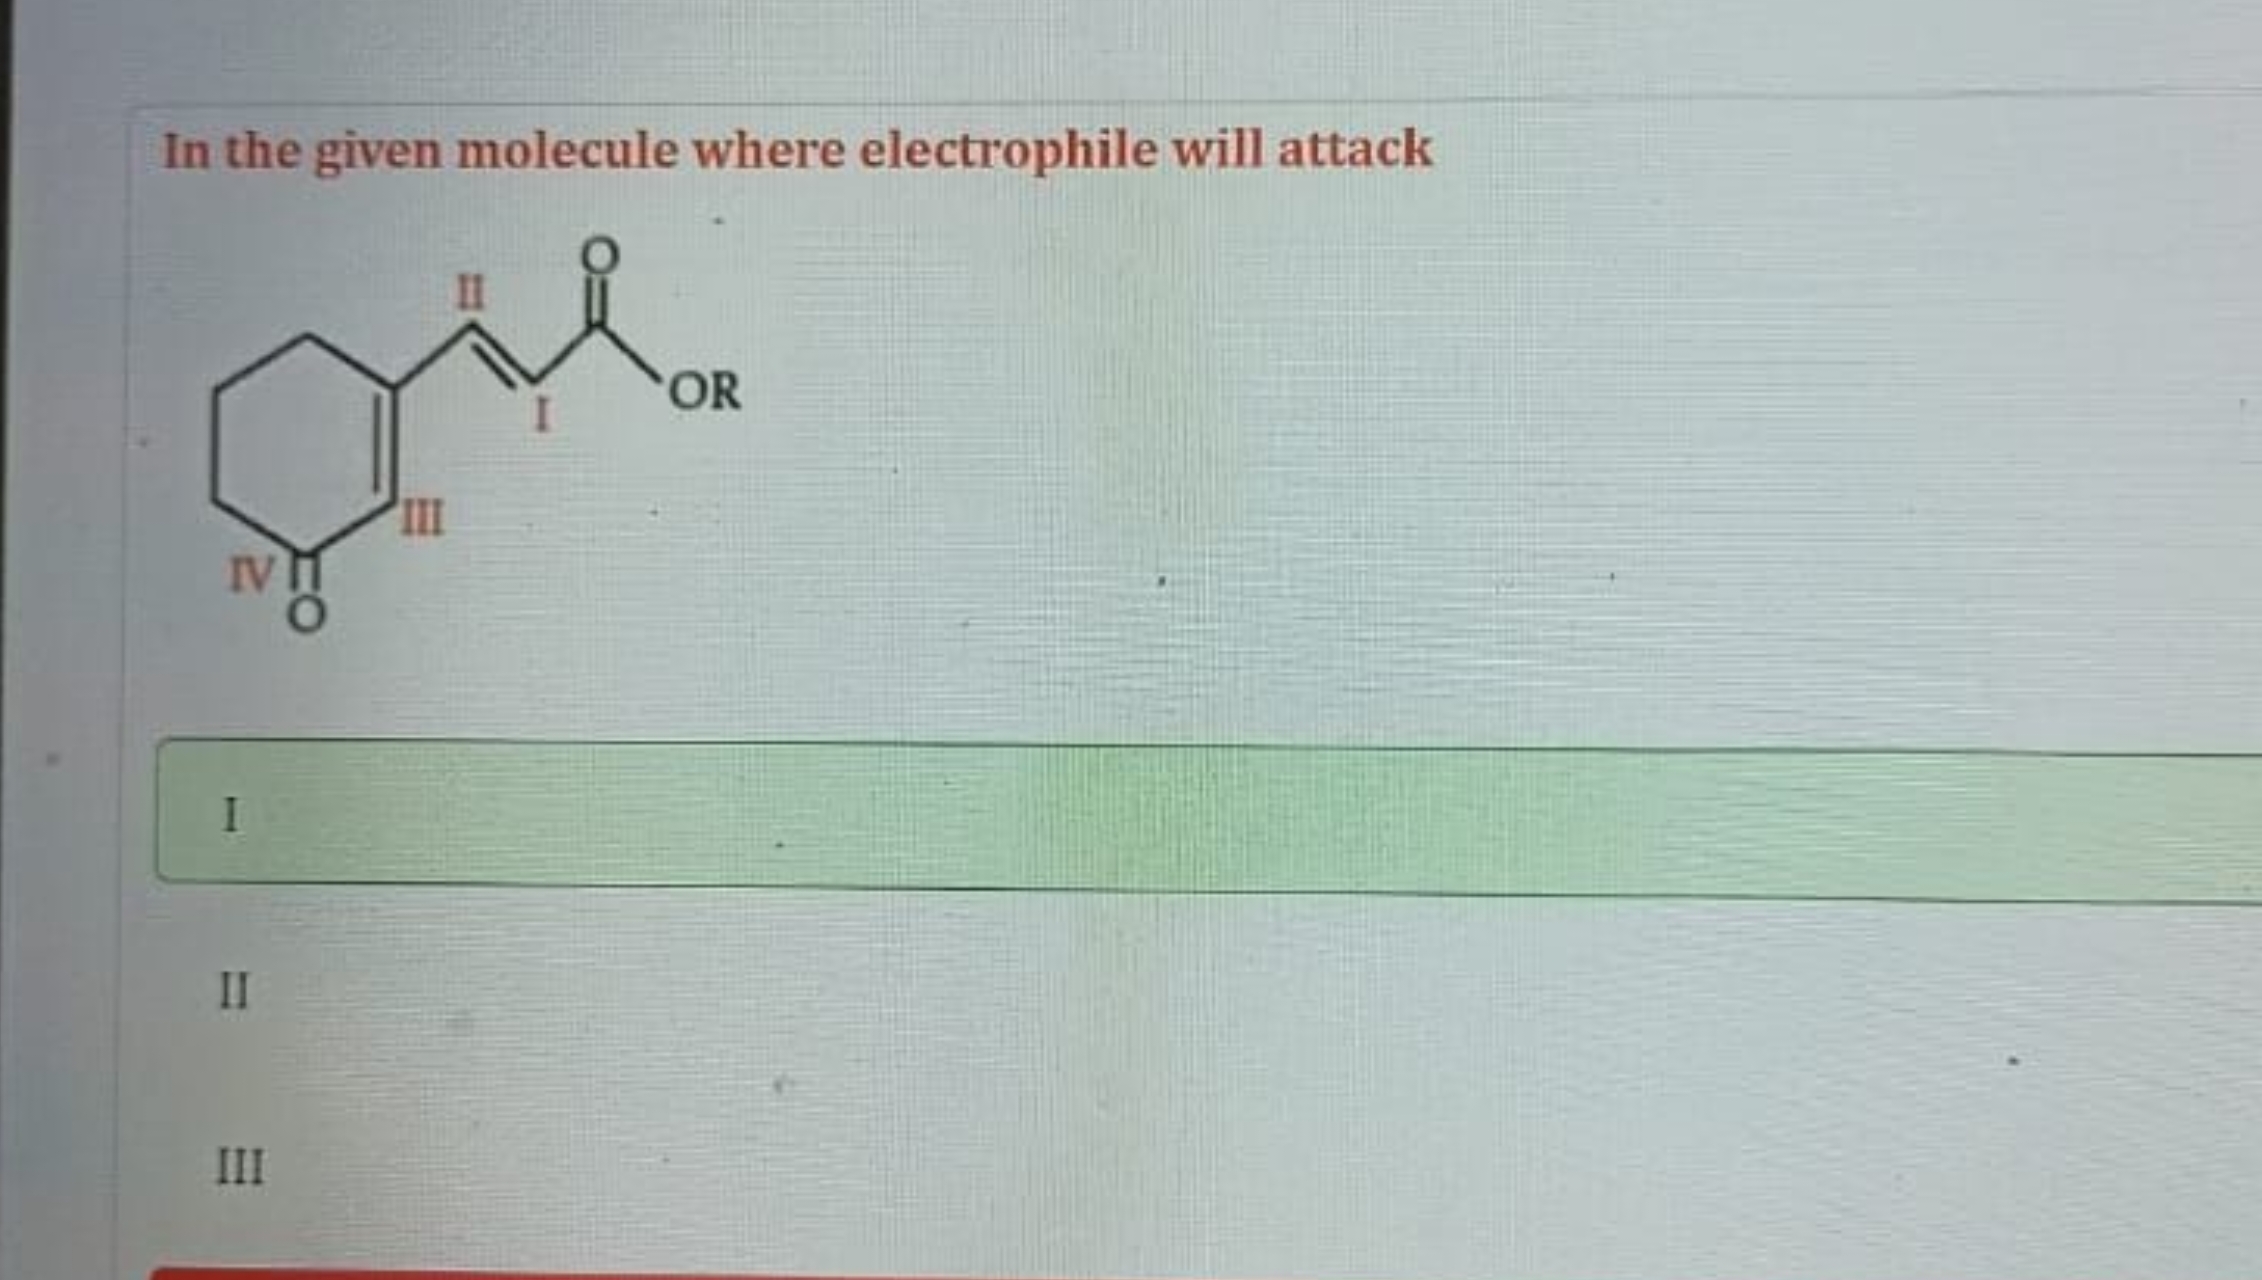 In the given molecule where electrophile will attack
[R]OC(=O)/C=C/C1=